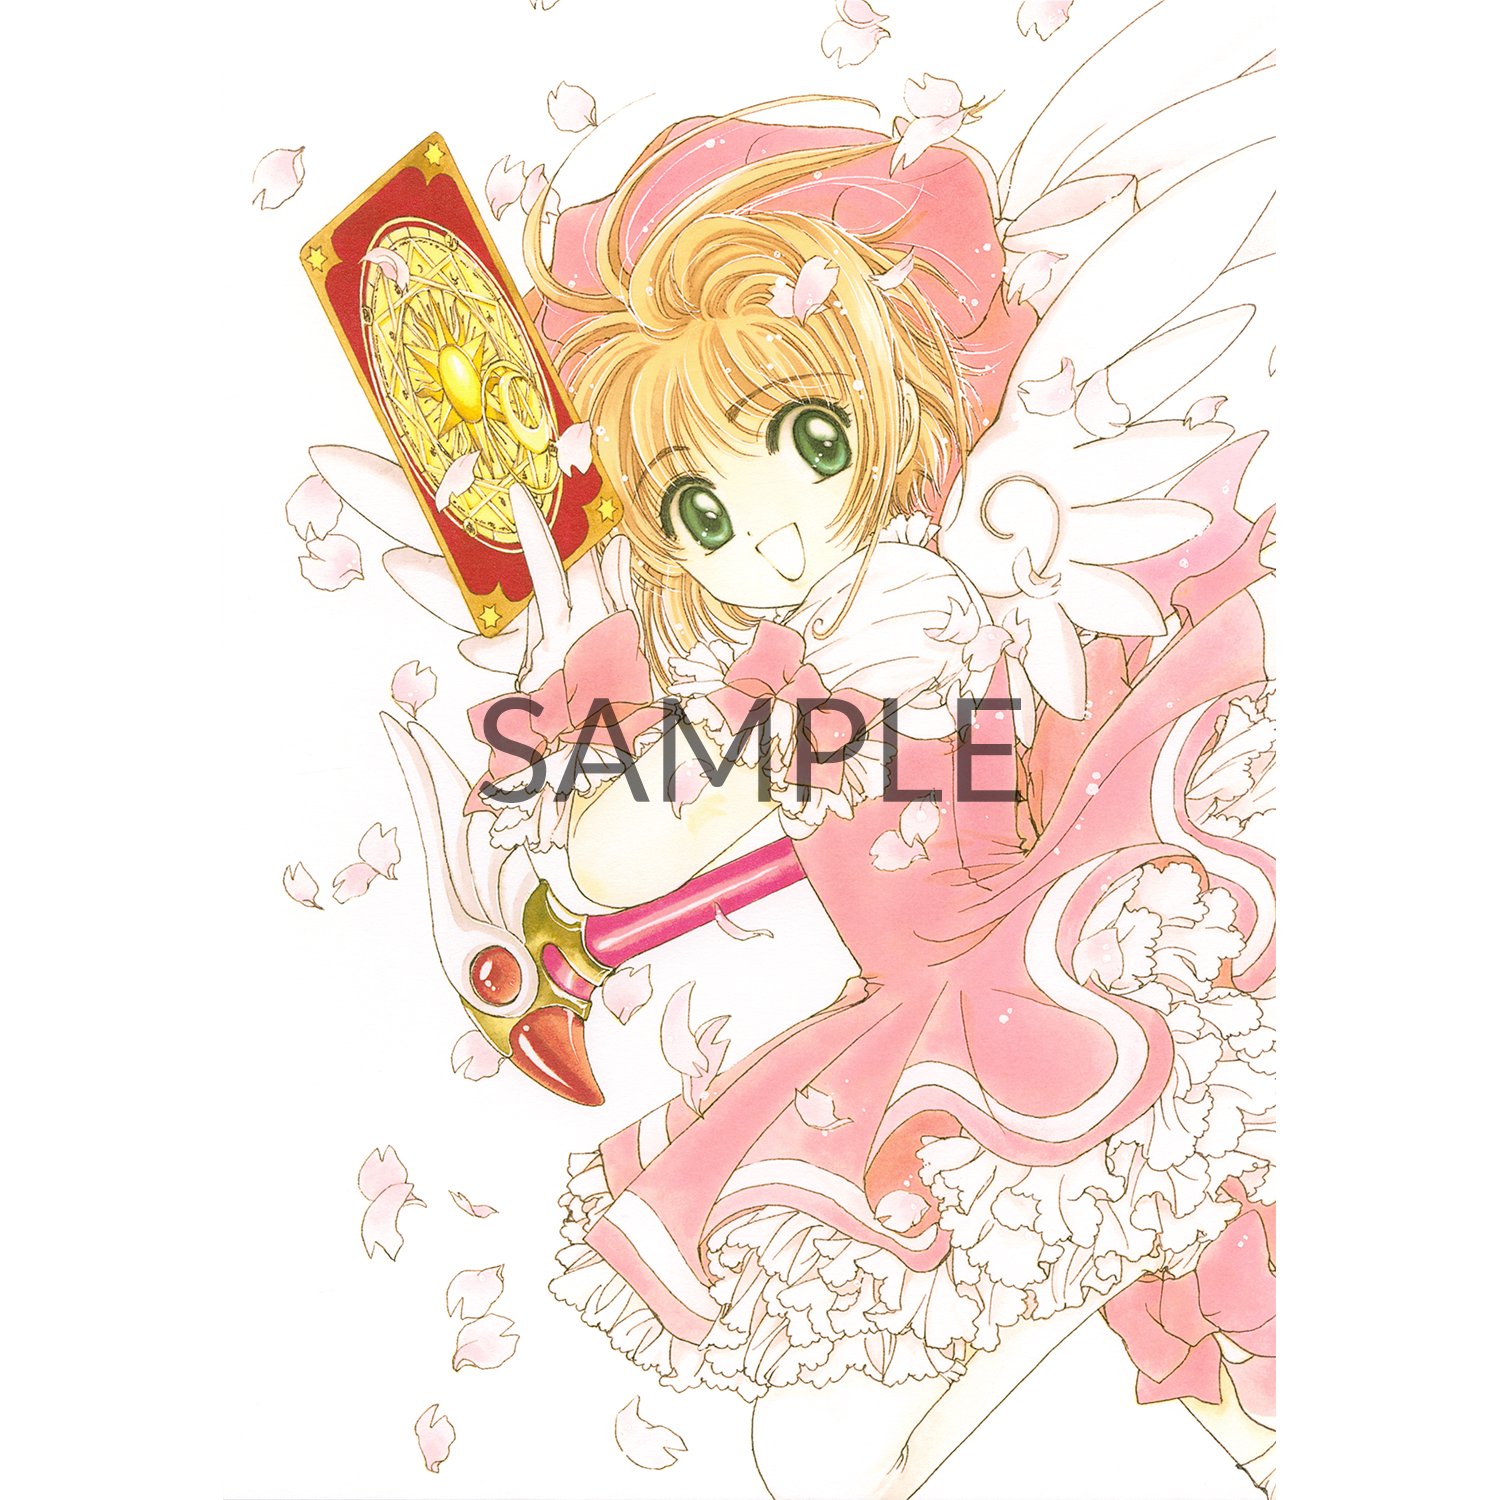 CLAMP 30th Anniversary- Clamp作品複製原画 Clamp Reproduction Art 